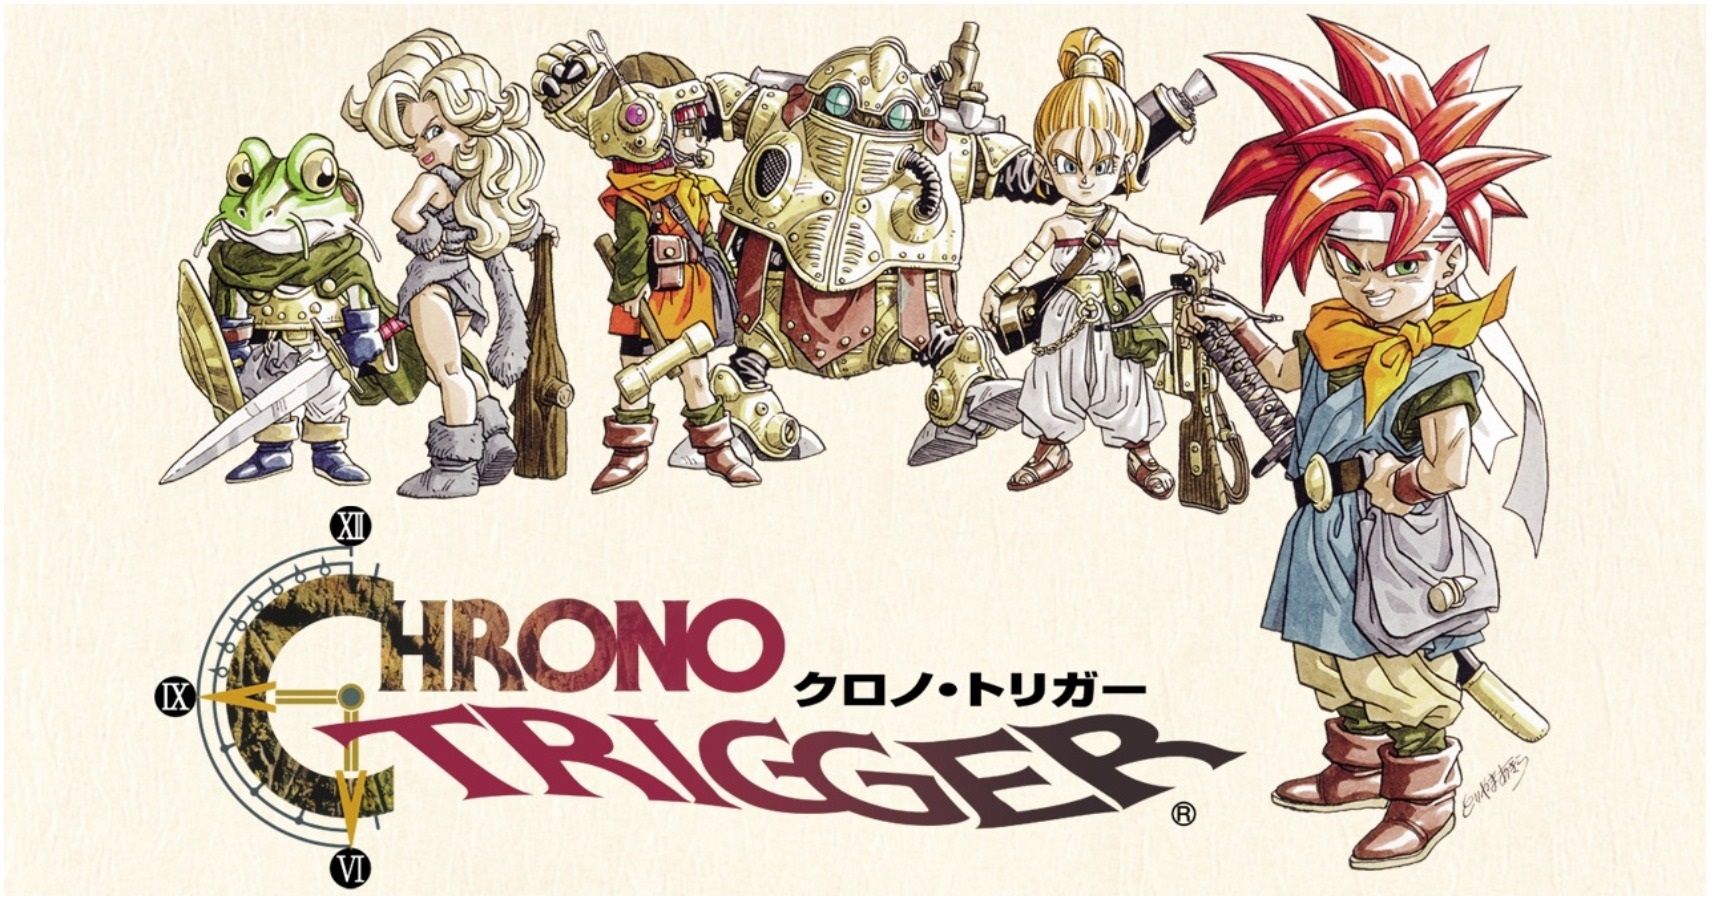 download chrono trigger nds